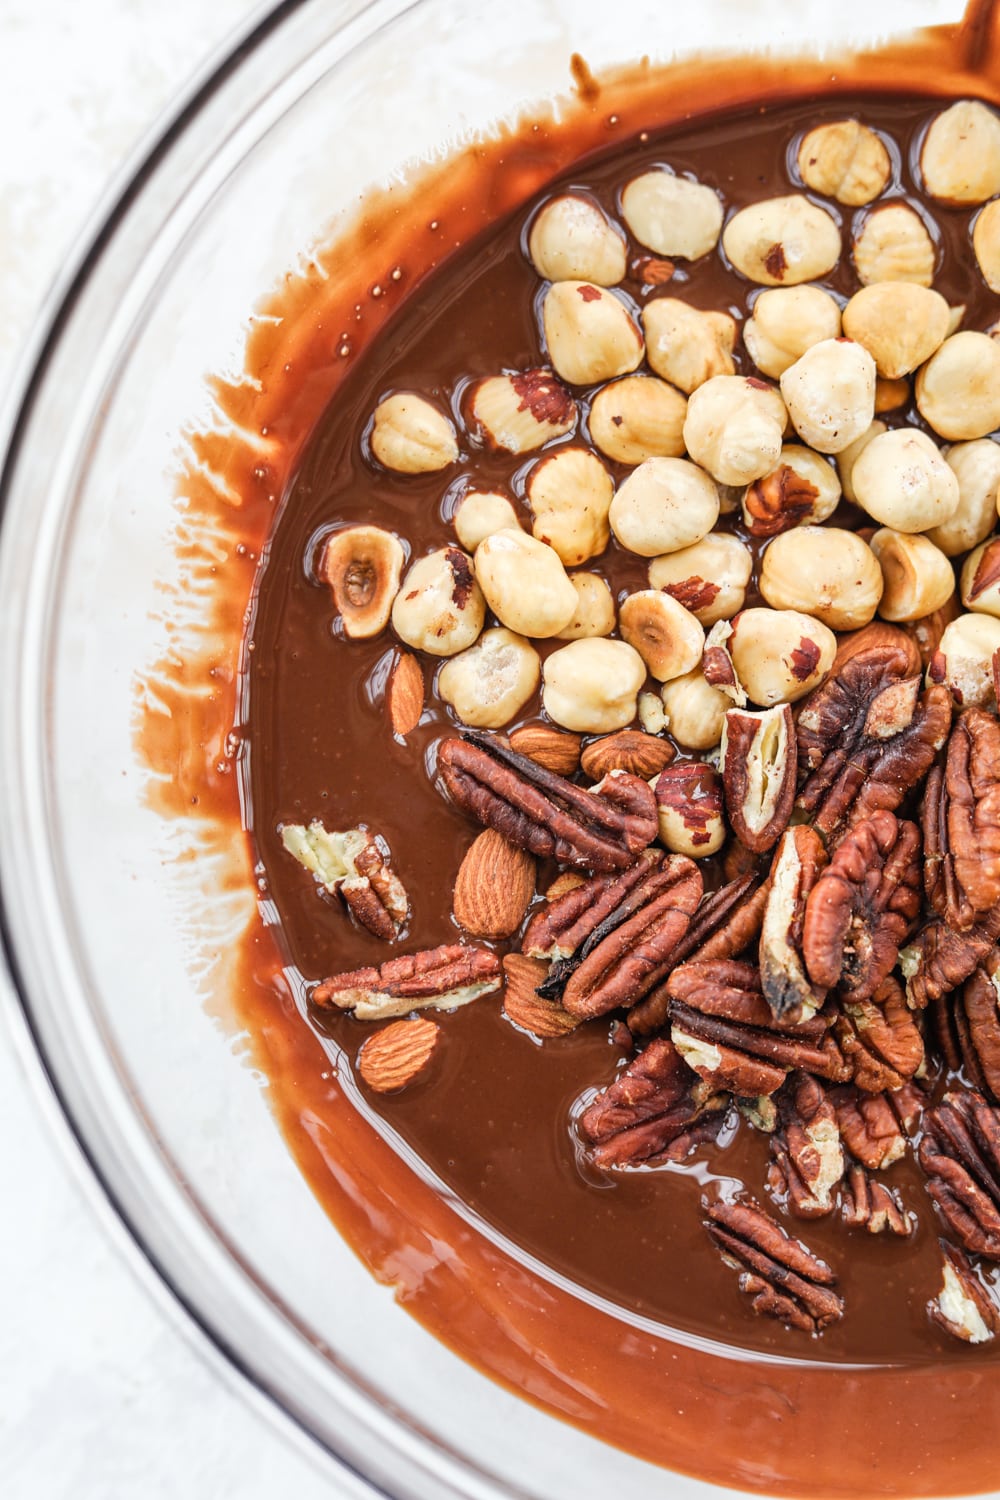 A clear glass bowl filled with melted chocolate and mixed nuts.